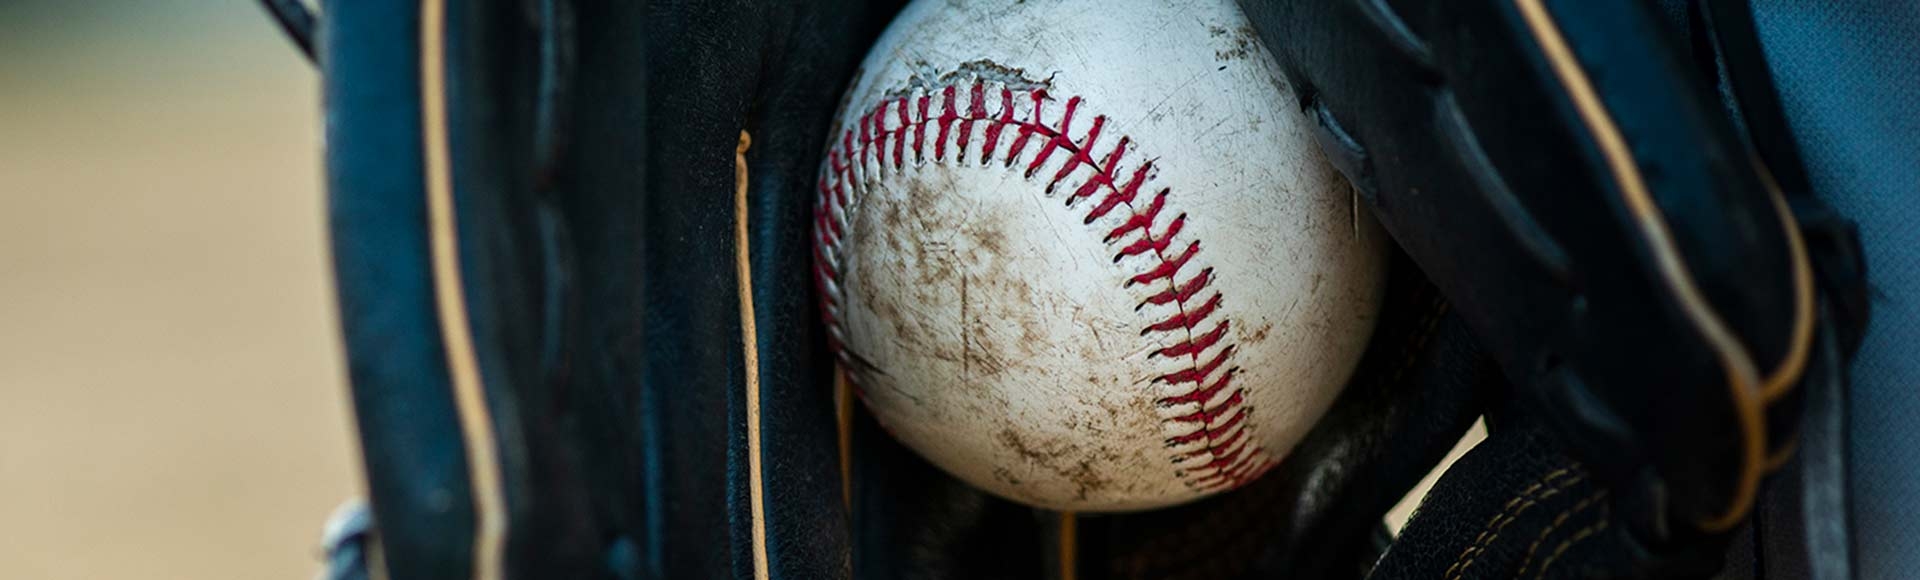 close up of baseball held in glove